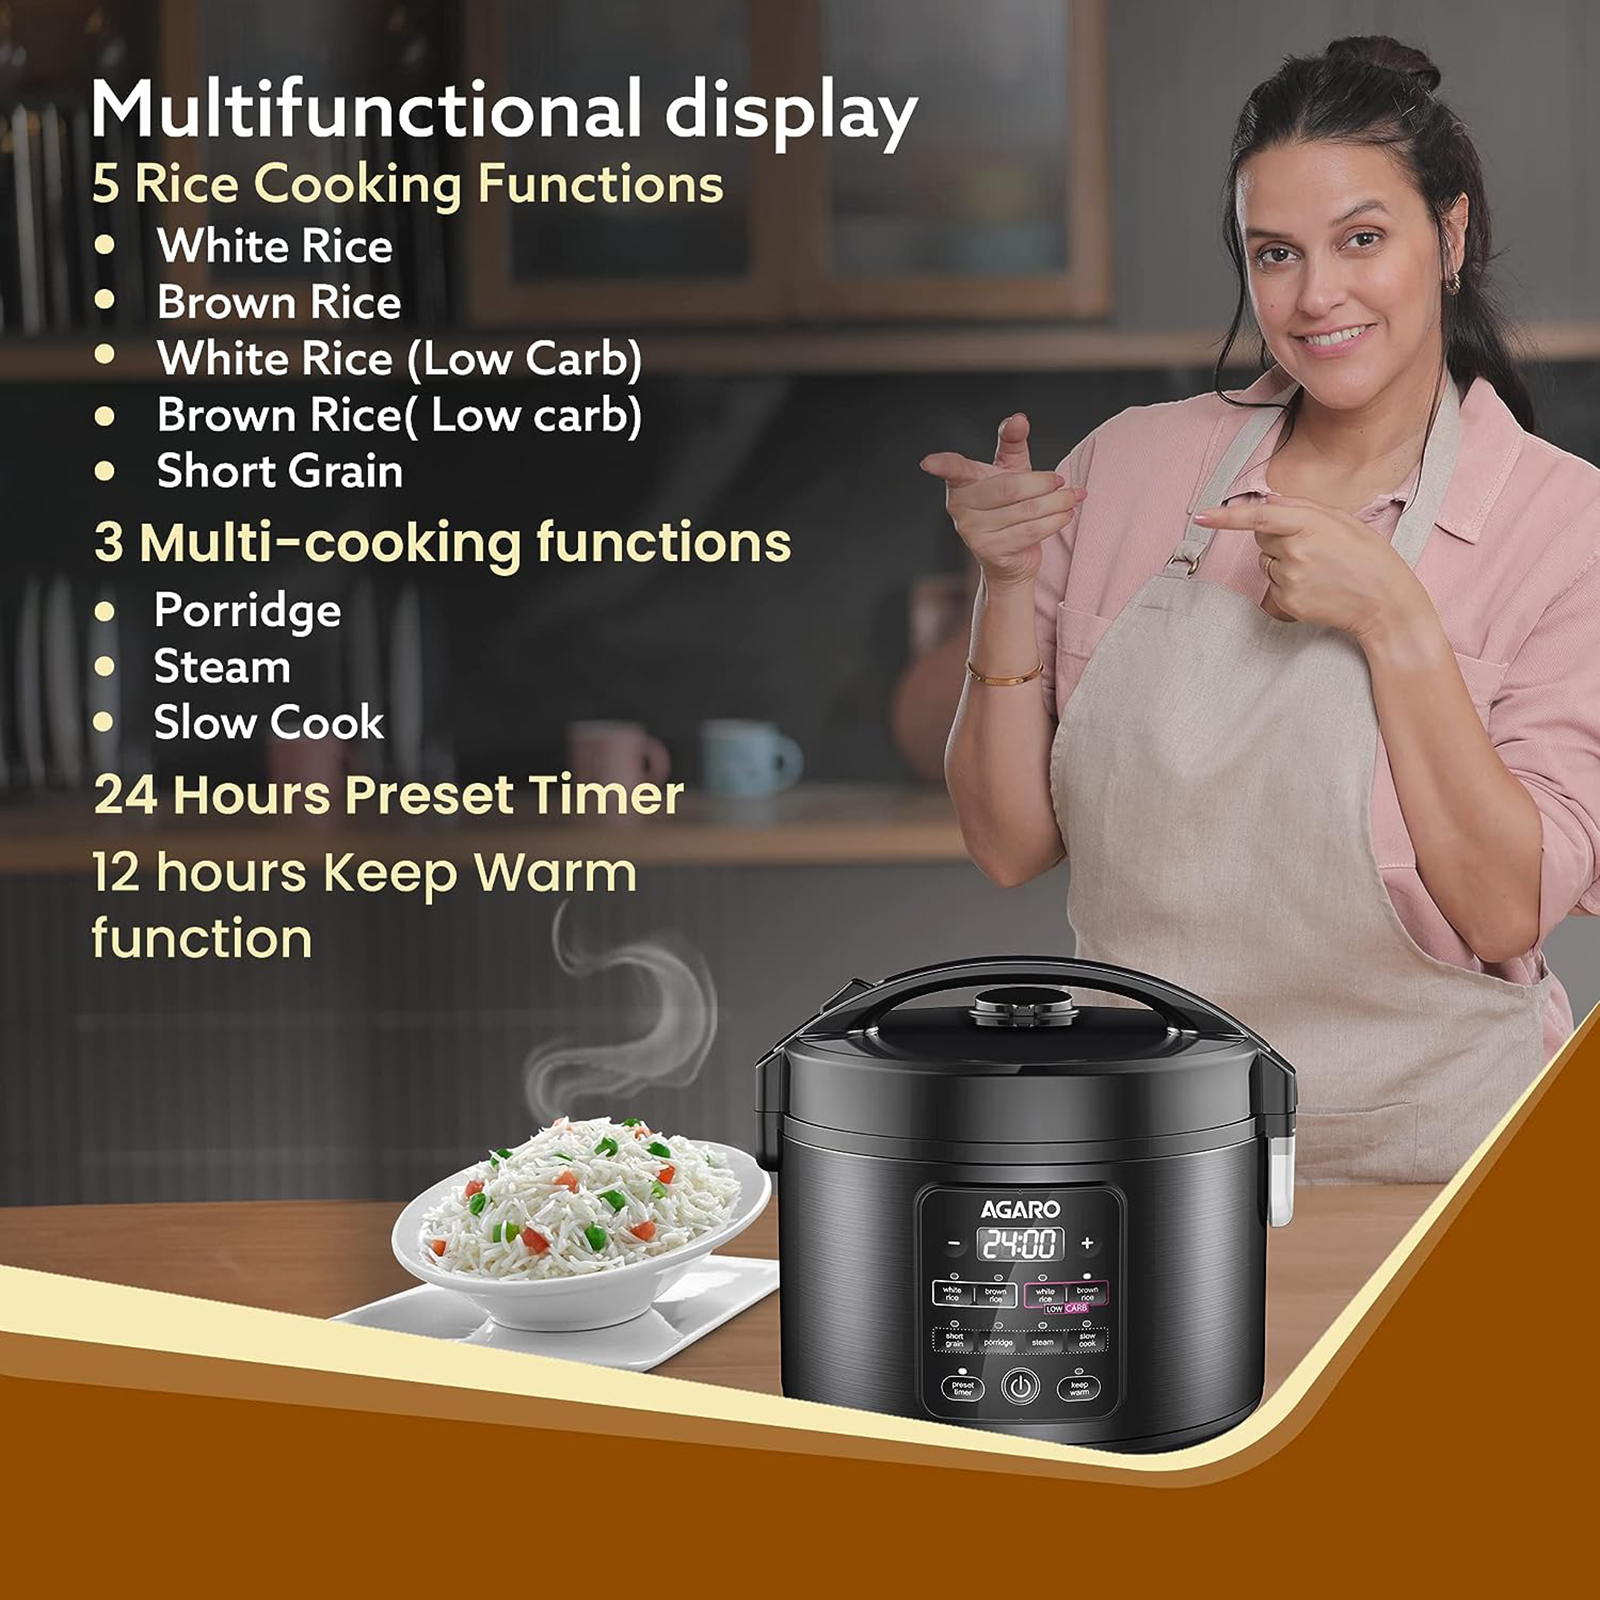 https://media.croma.com/image/upload/v1691678603/Croma%20Assets/Small%20Appliances/Steamers%20Cookers/Images/270758_15_ch5vzb.png